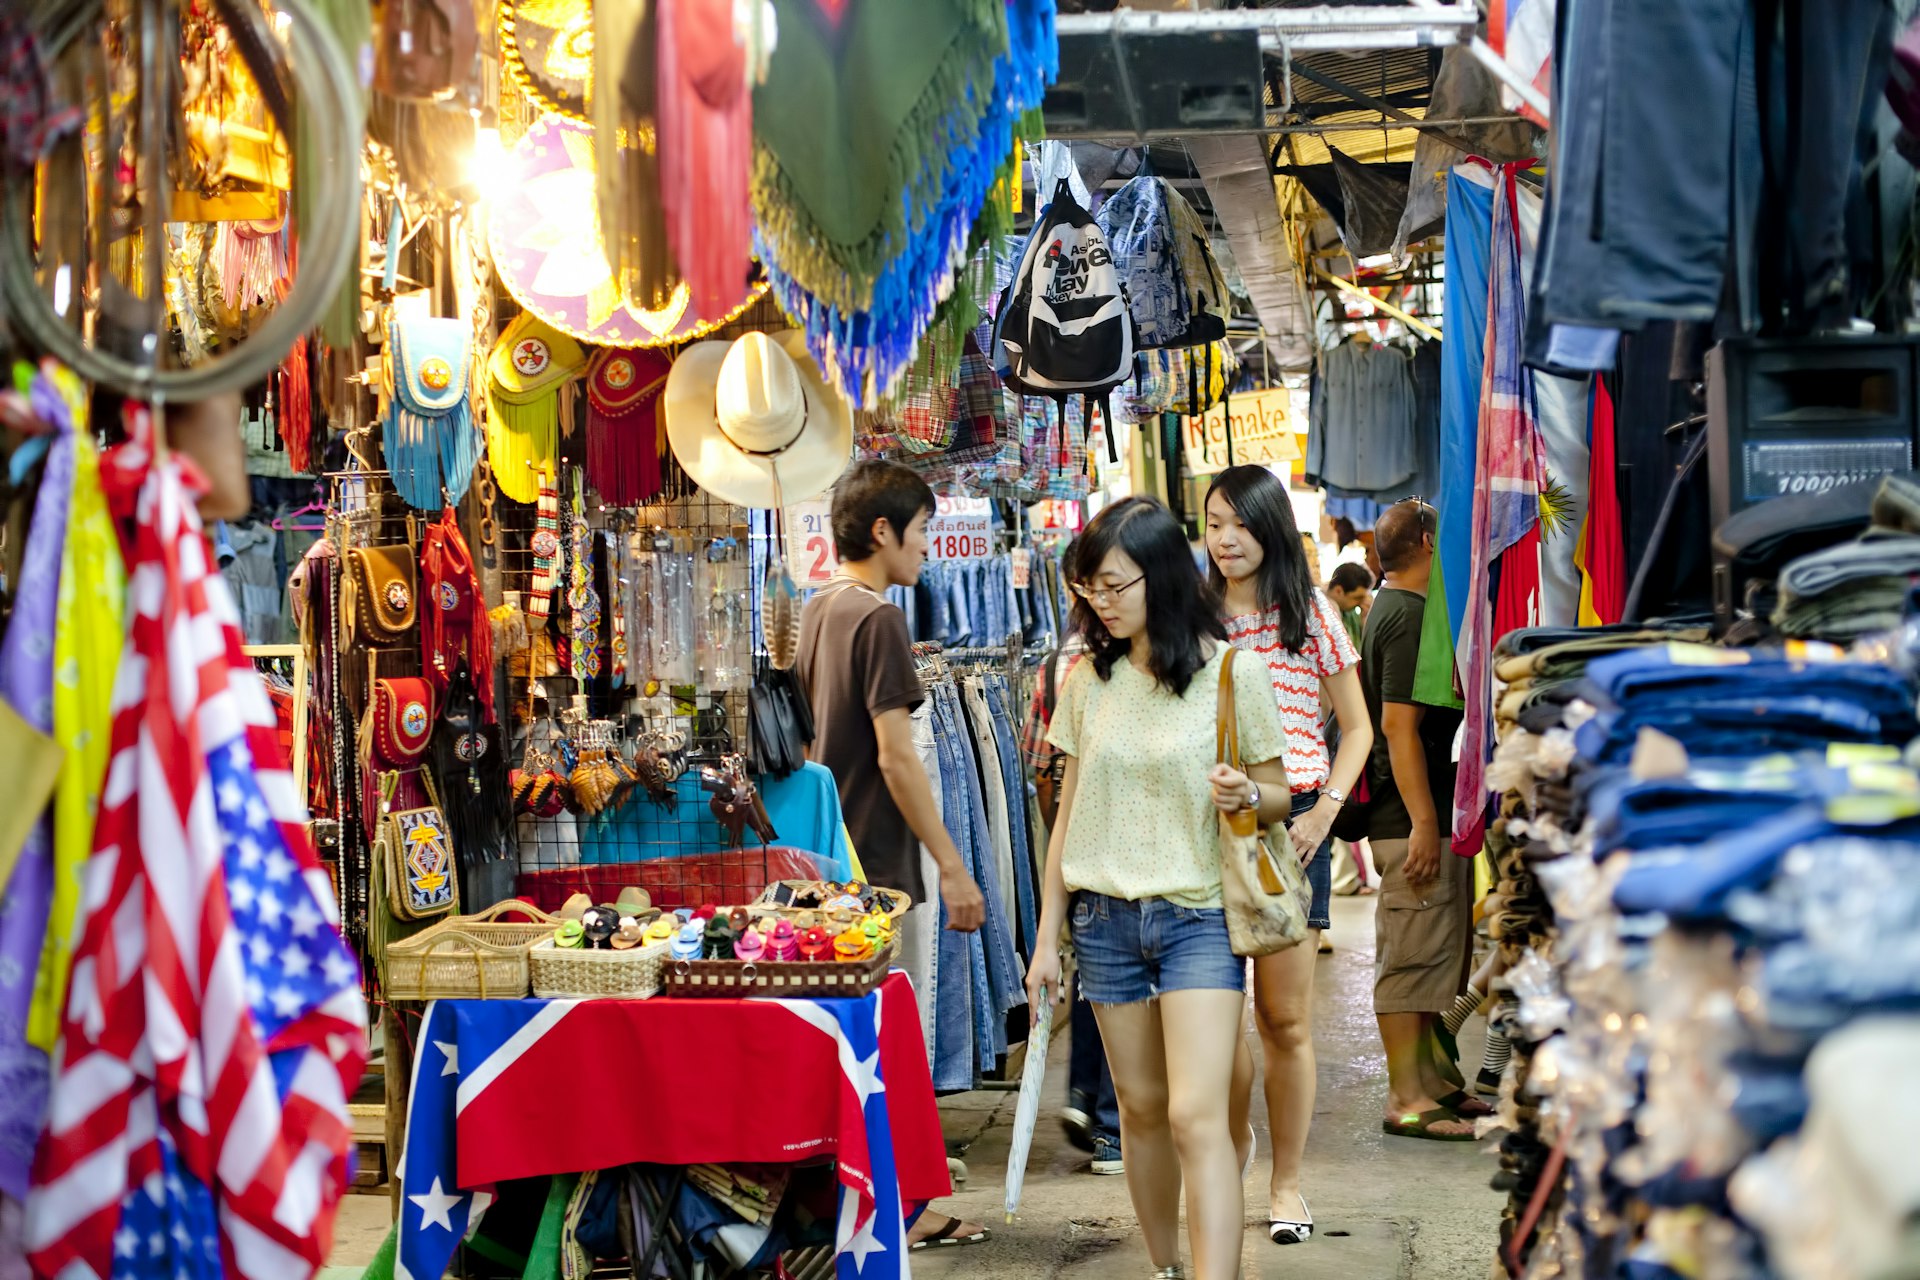 Tourists check out the hanging bags and hats at the stalls of Chatuchak Weekend Market in Bangkok, Thailand.